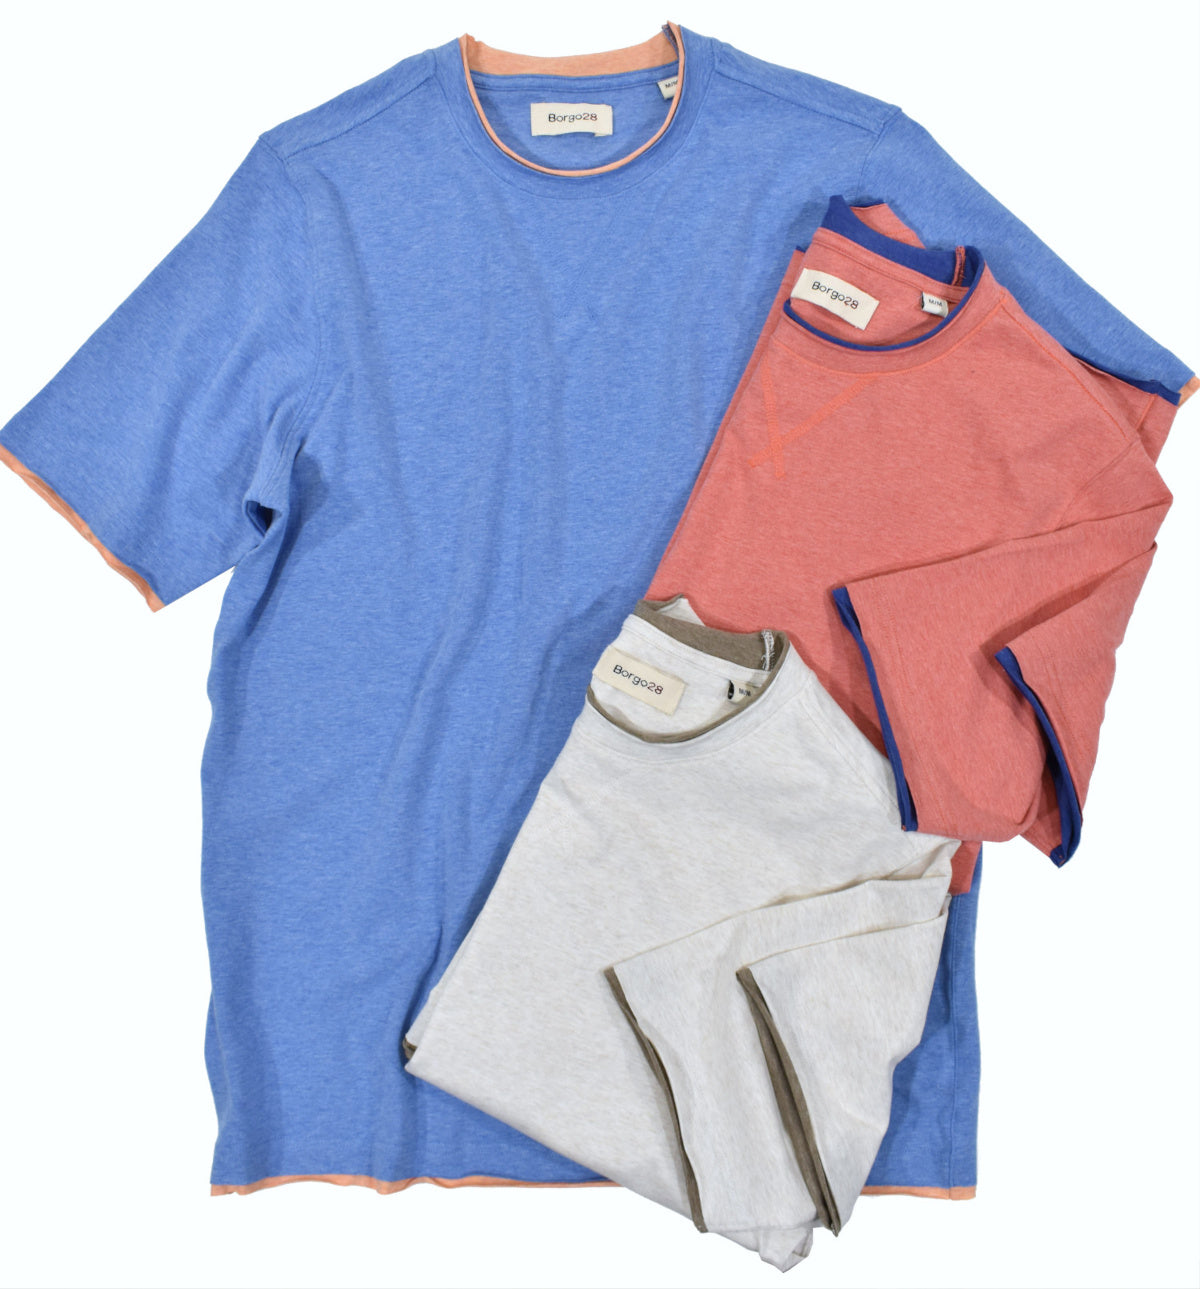 Ultra soft washed cotton with a touch of spandex for stretch comfort.  All the edges are finished with contrast color fabric to create a raw looking edge and trendy hip look.  Tonal sweatshirt enhanced stitching at the front neckline.  Classic fit.   Colors: Blue, Red, Wheat